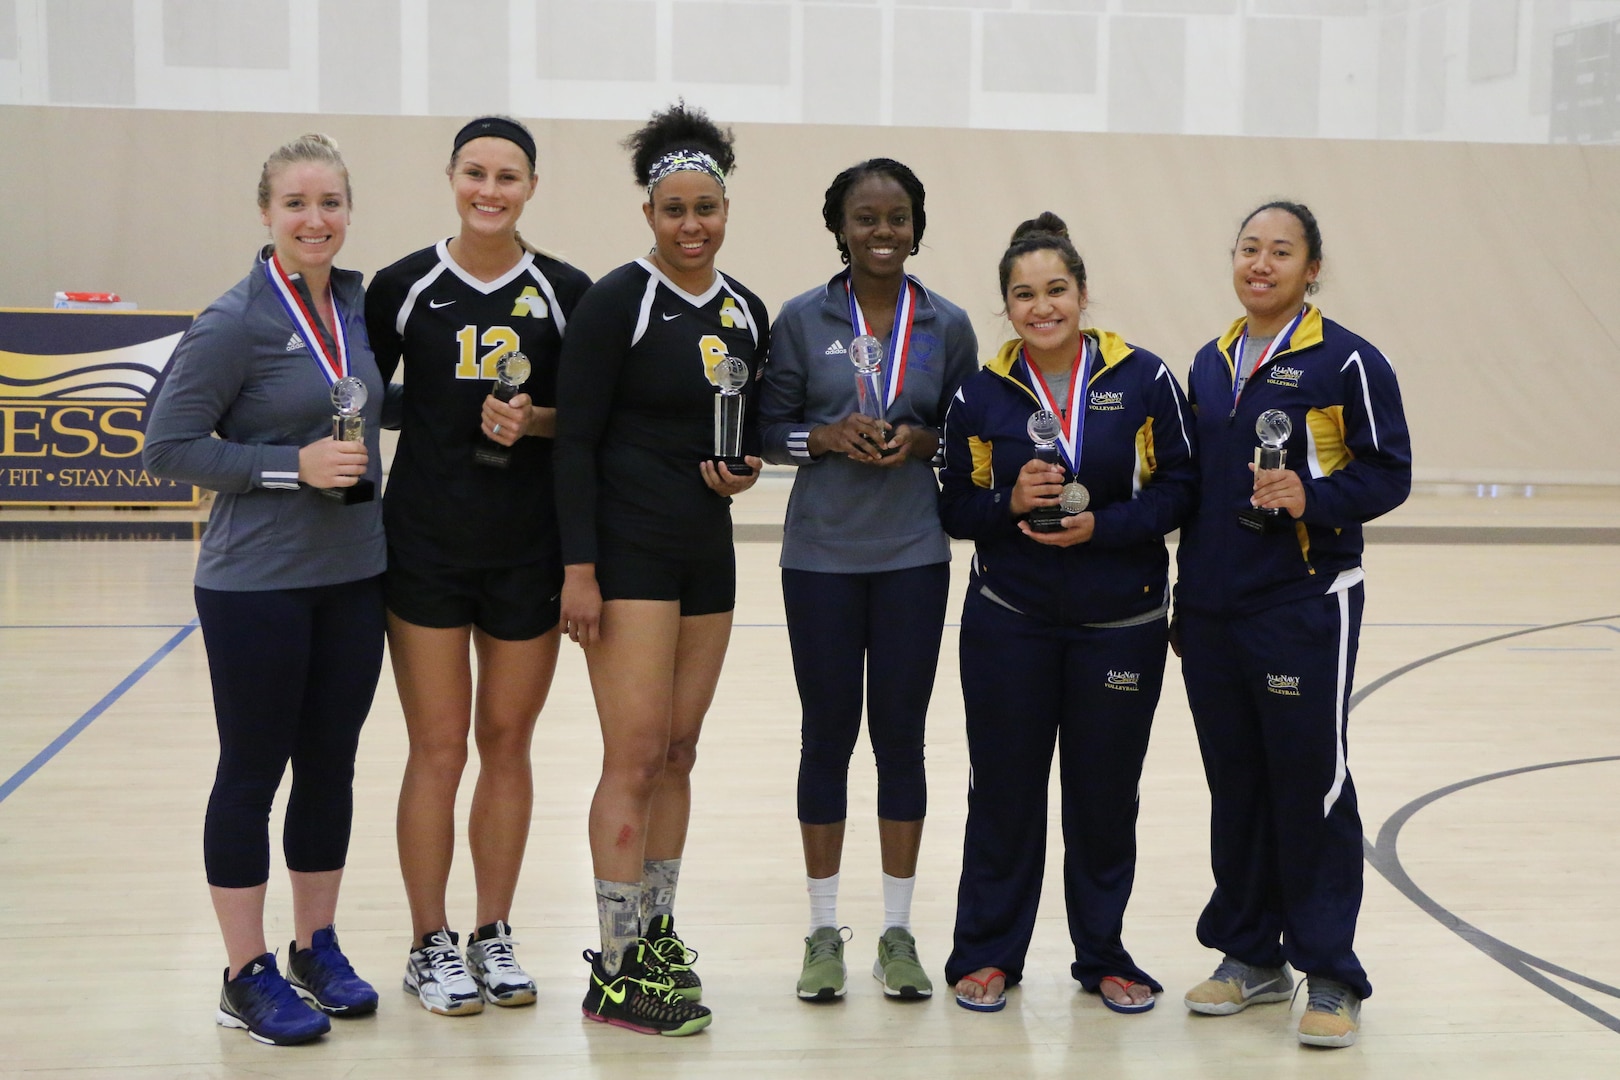 Your 2017 U.S. Armed Forces Women's Volleyball All-Tournament Team.  Selections made immediately following the last match of the 2017 Armed Forces Women's Volleyball Championship at Naval Station Mayport, Florida held 17-21 May. 
1st Lt Hillary Keltner, Air Force
1LT Megan Wilton, Army
SGT Latoya Marshall, Army
2d Lt Felicia Clement, Air Forces
HN Denise Altualevao, Navy
PO3 Angelina Pulu, Navy